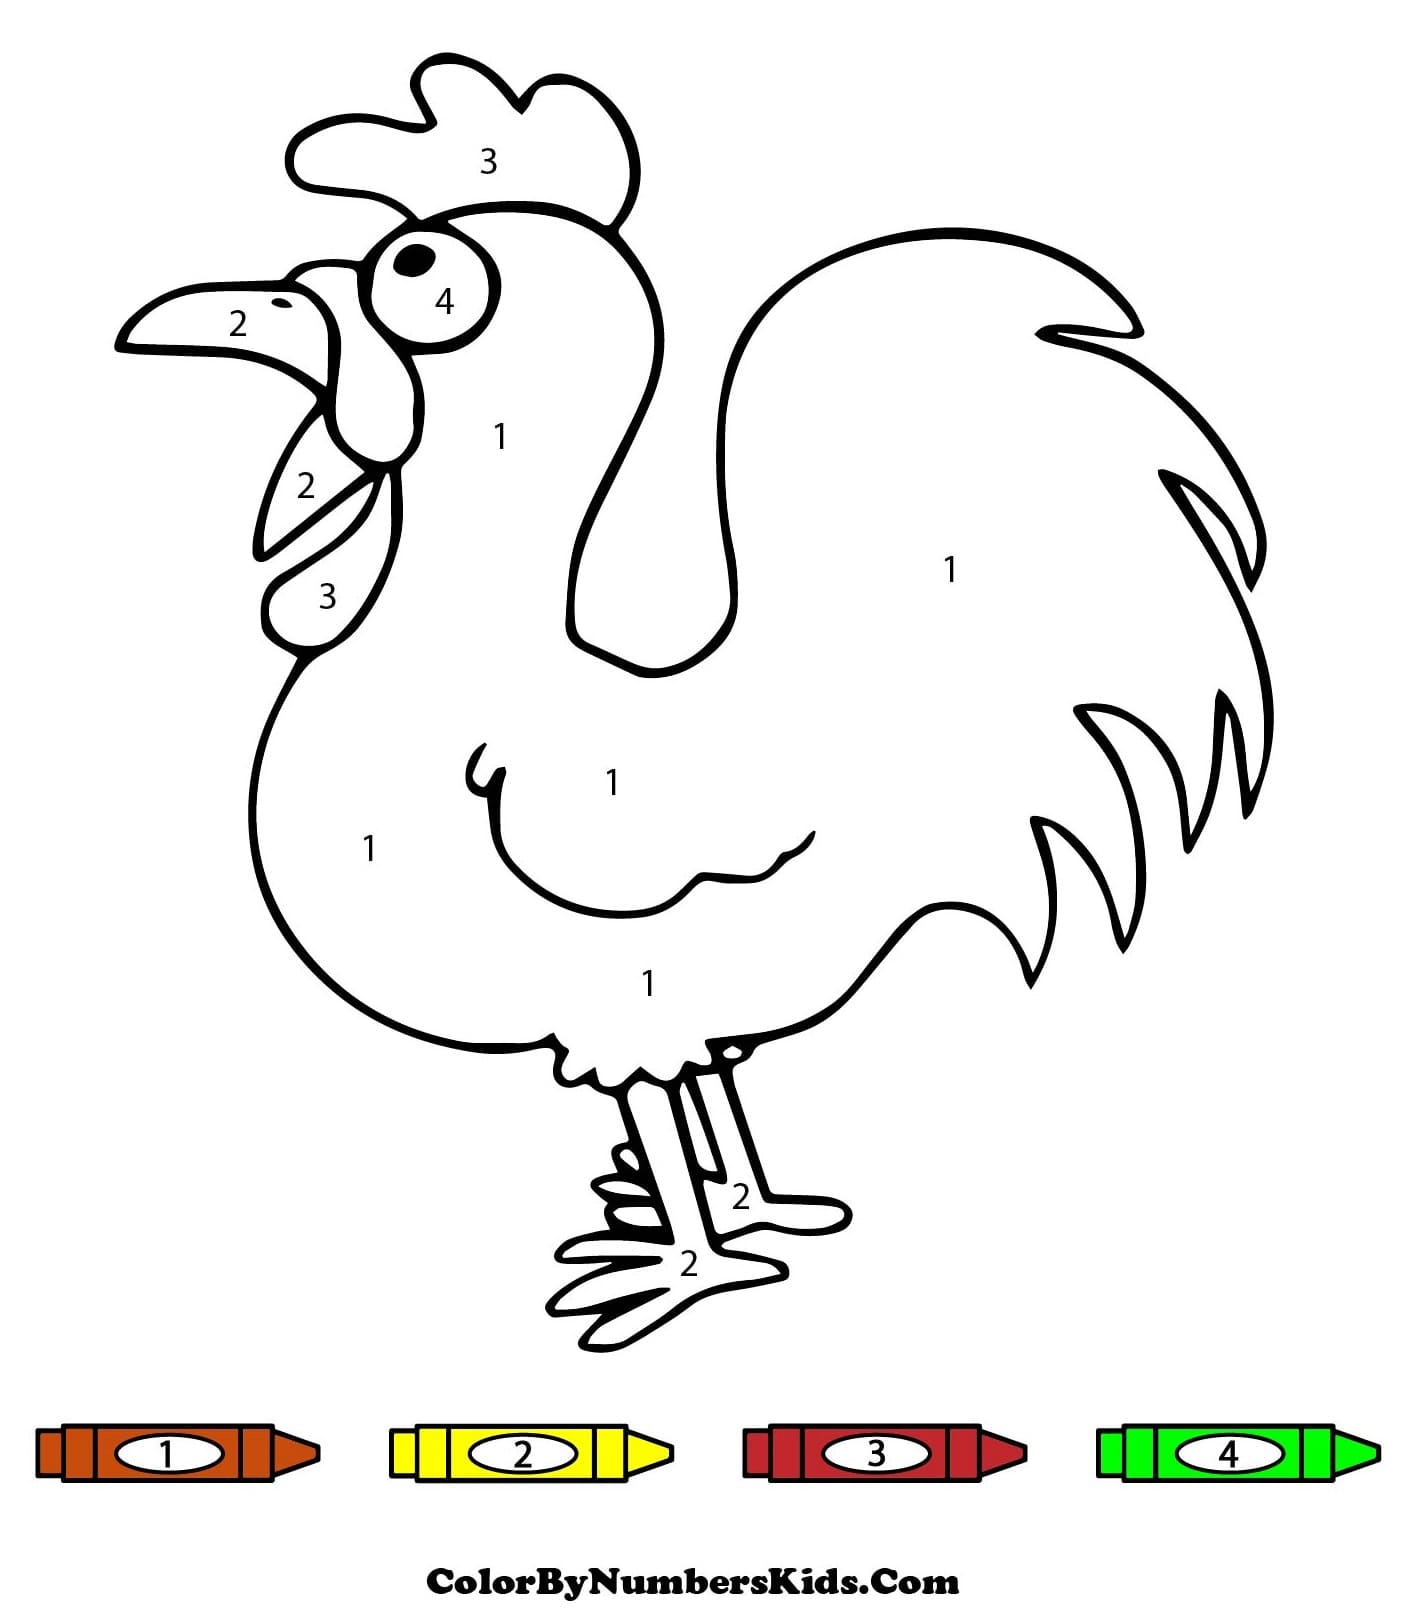 The Chicken Color By Number